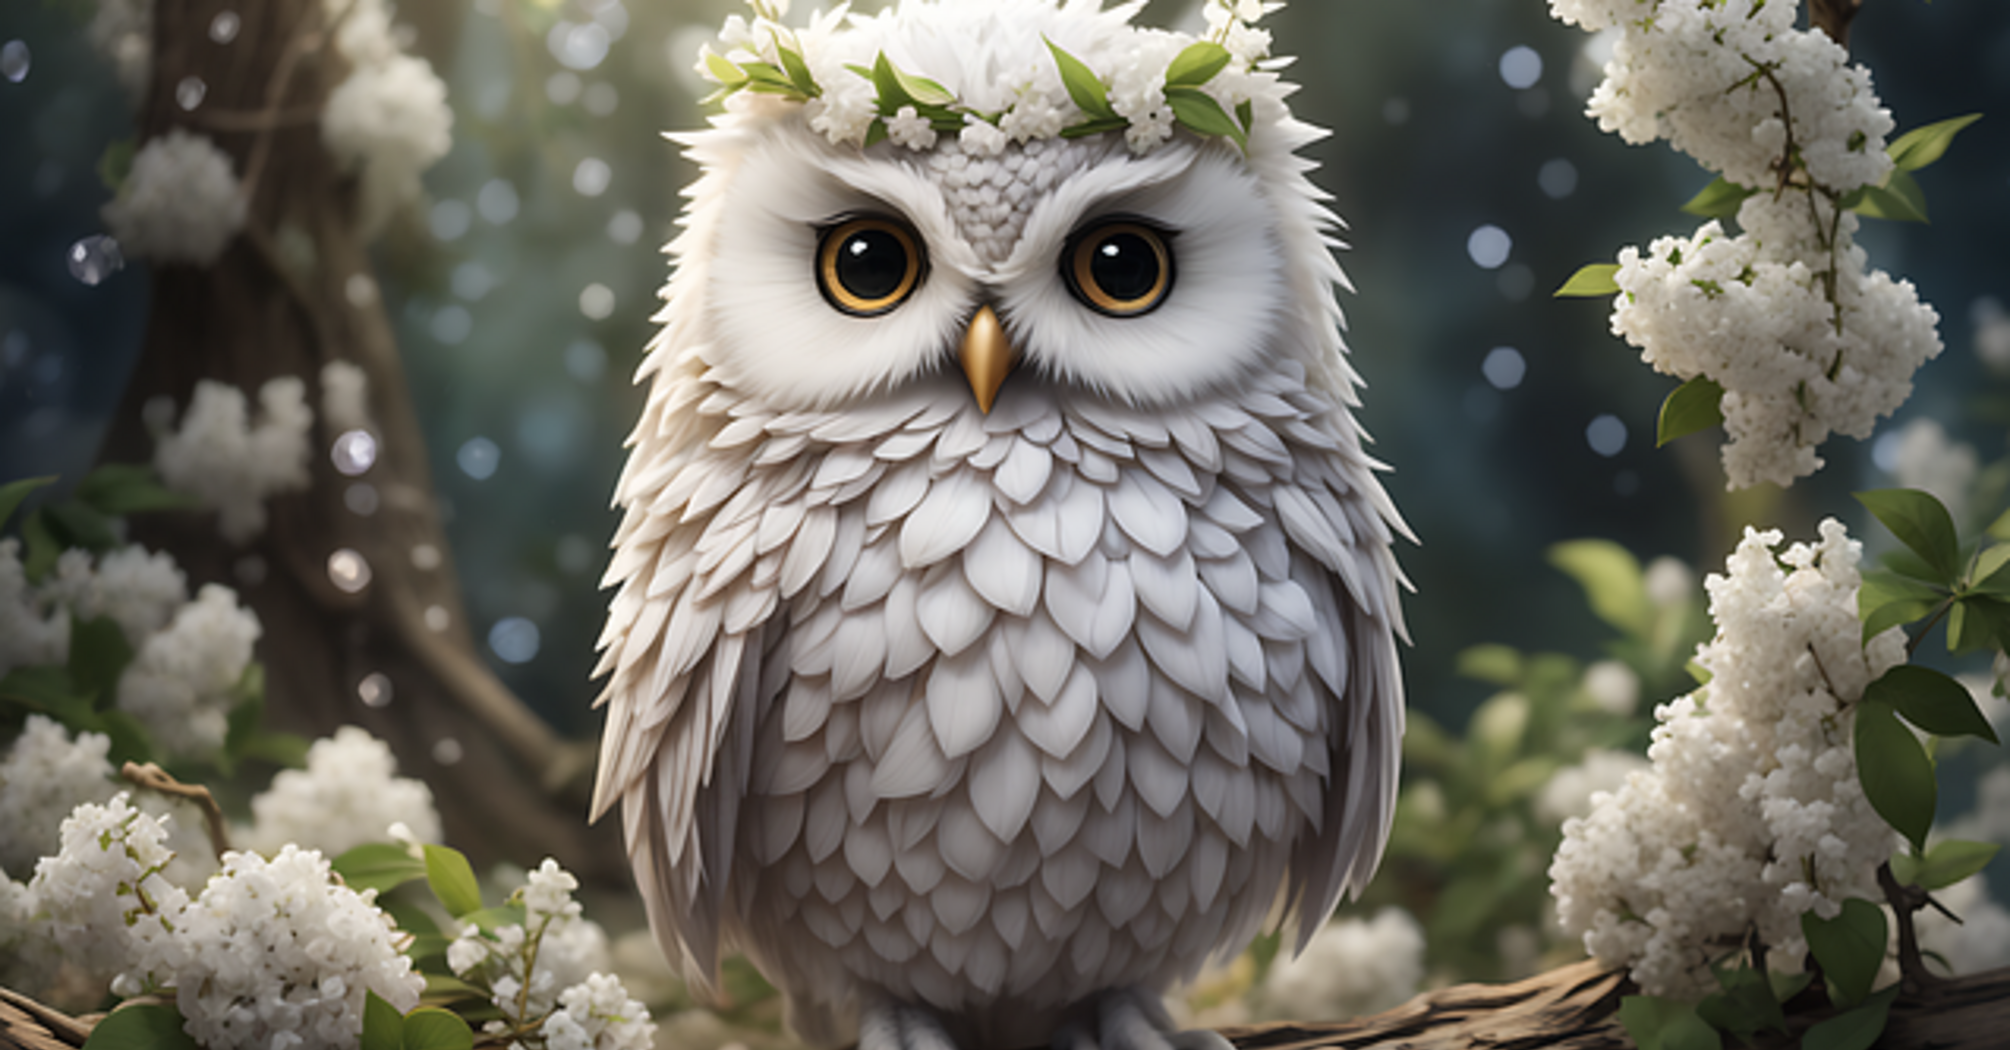 To see a white owl - meaning